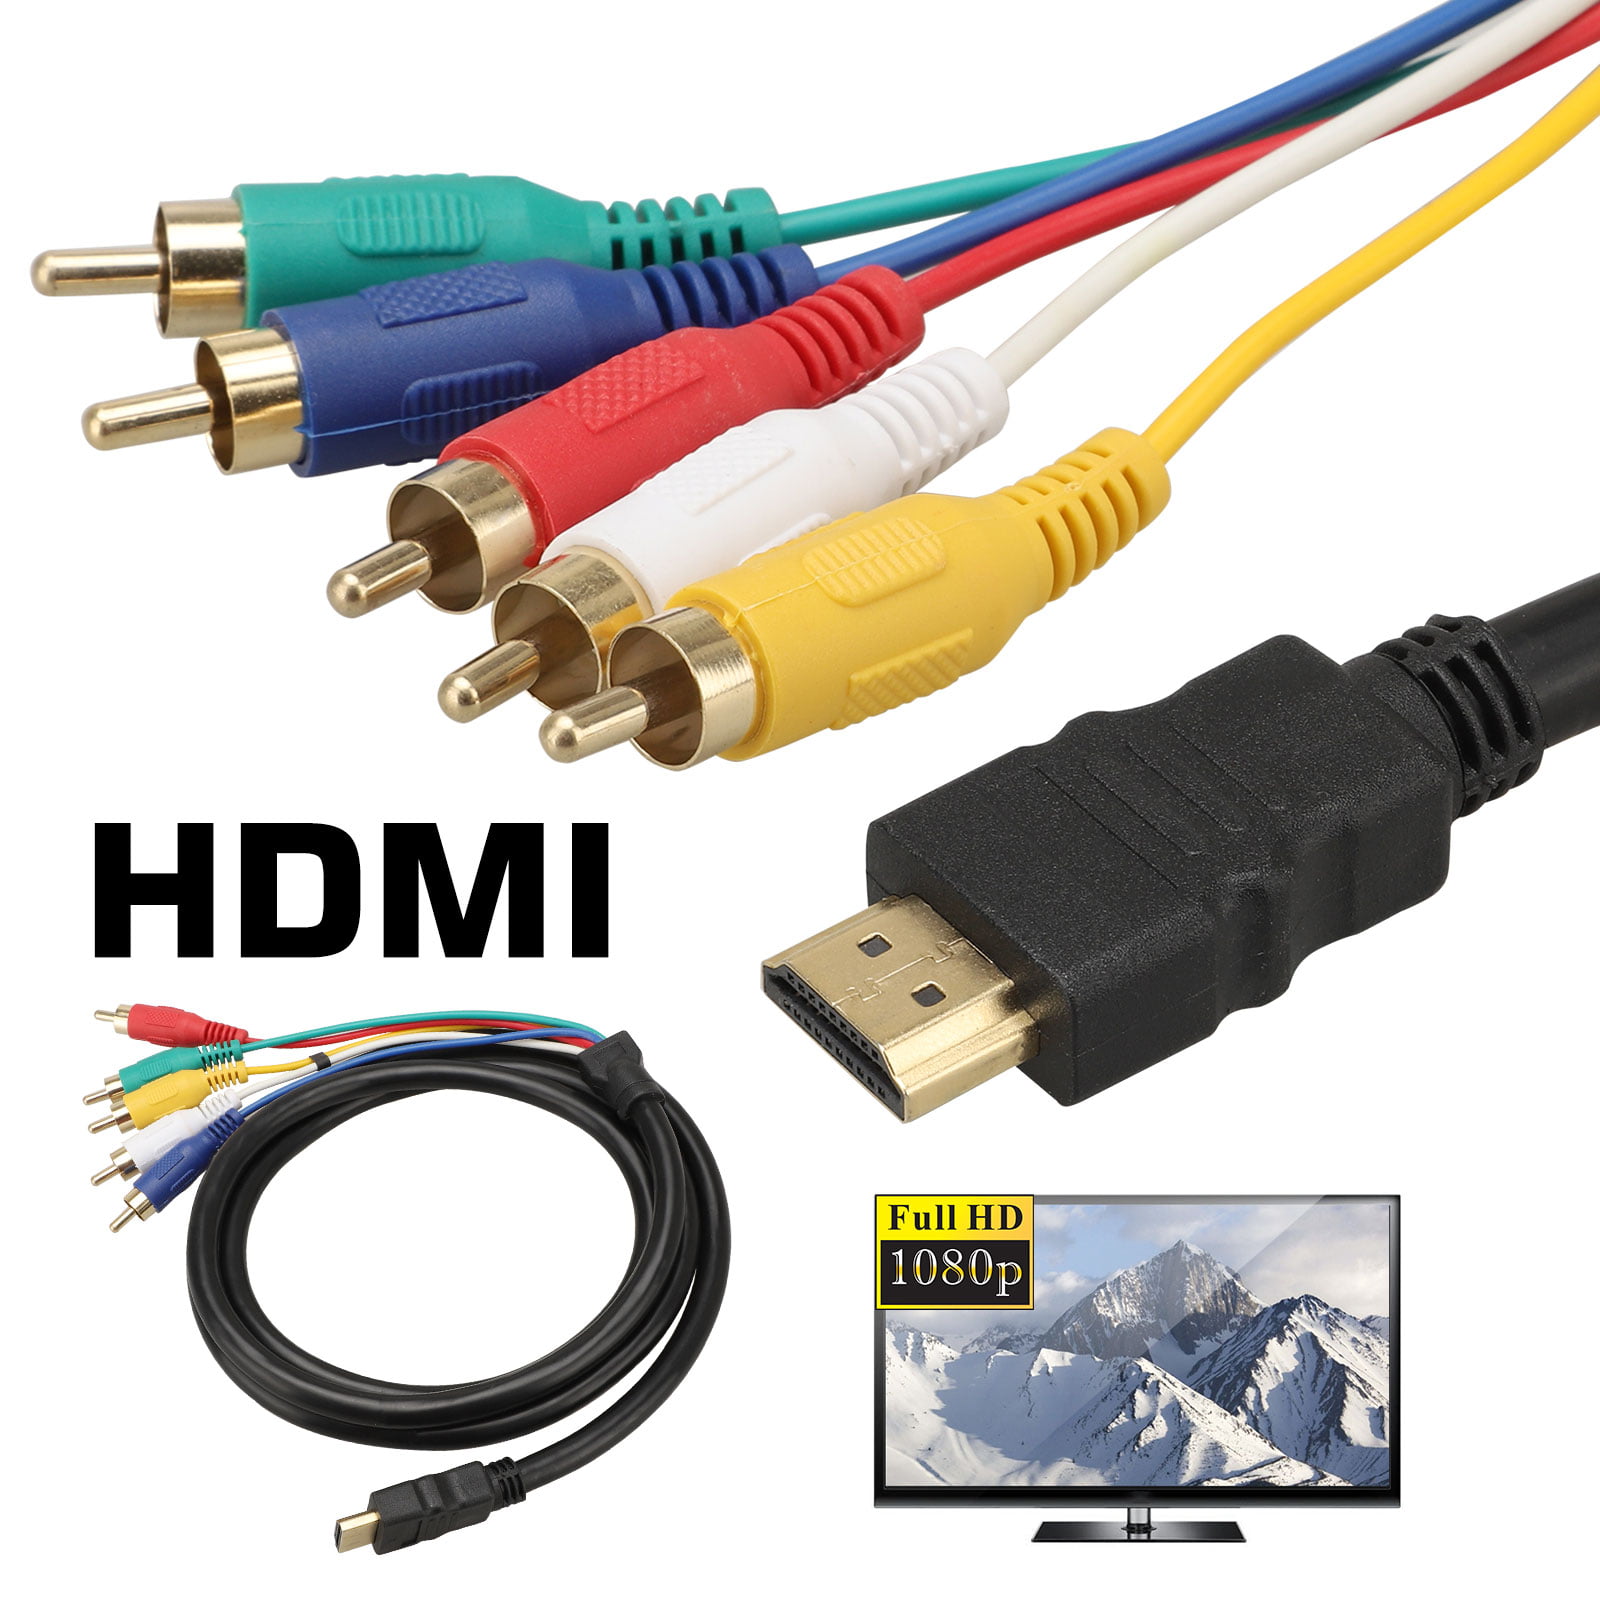 HDMI to RCA Cable, EEEkit HDMI Female to 5RCA Plug Video Audio AV Component Converter Adapter Cable for HDTV/DVD and Most LCD Projectors